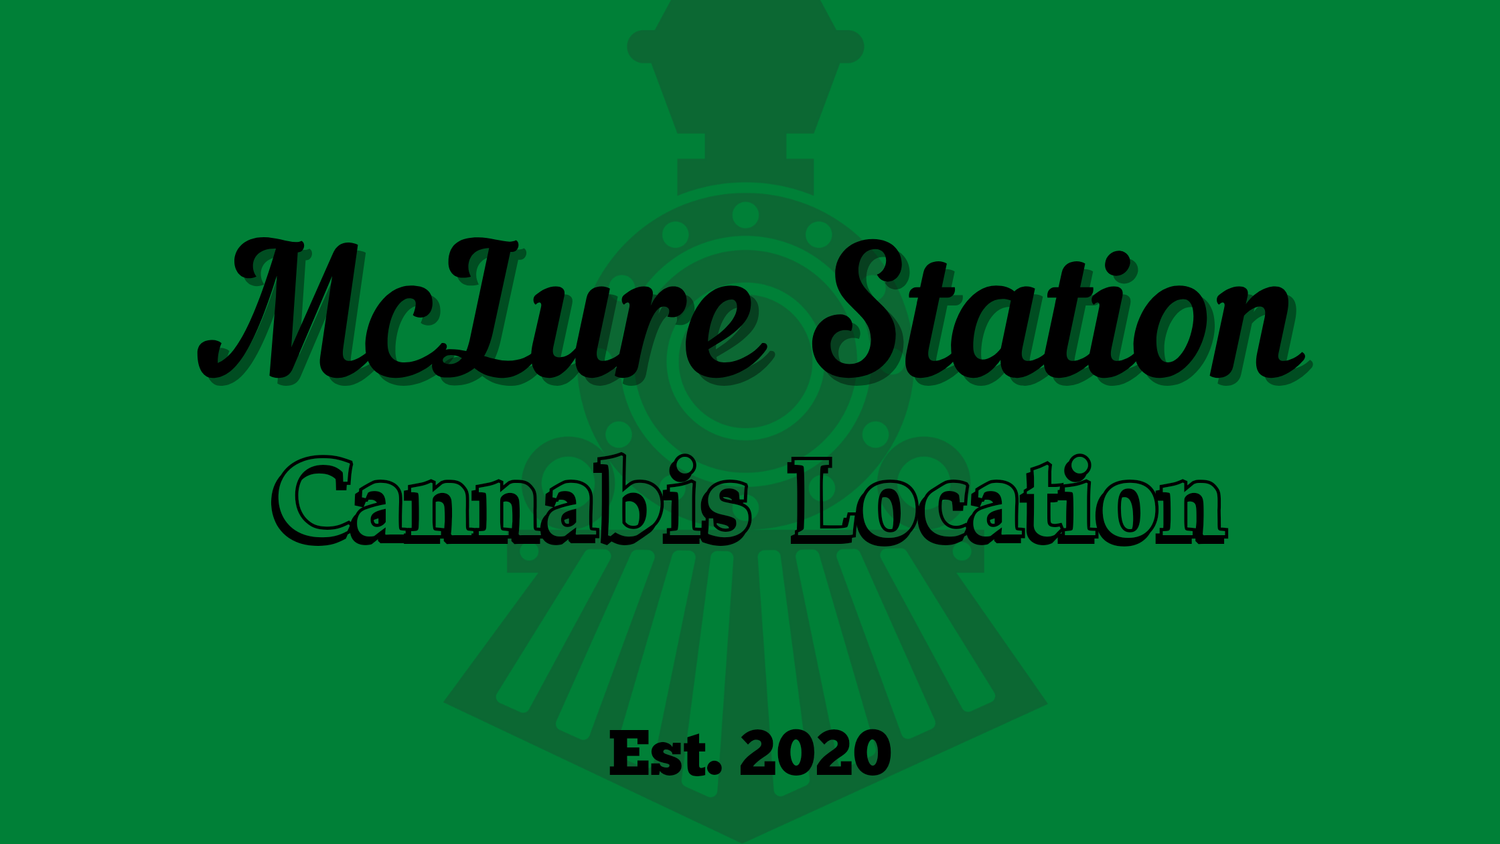 McLure Station Cannabis Location